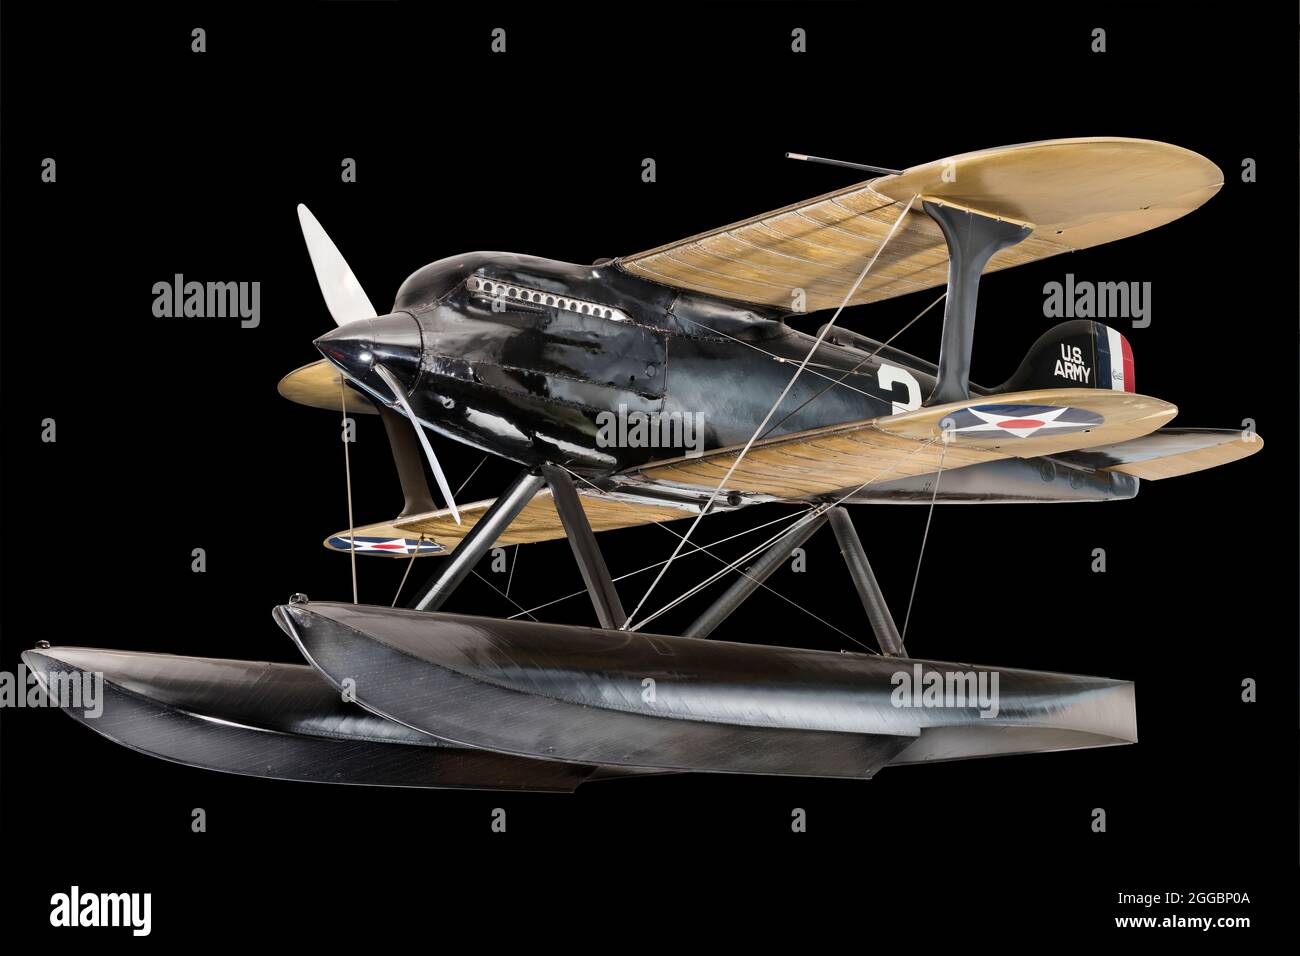 Curtiss V-1400 Engine:;Type: V-type, 12 cylinders, water-cooled;Mfg. No. 9;Power rating: 496 kw (665 hp);Bore and Stroke: 12.382 cm (4.875 in.) x 15.875 cm (6.25 in.);Displacement: 22.95 liters (1400 cu. in.);Curtiss-Reed Propeller:;Design: EX-32995;Two-Blades, Fixed-Pitch;Serial No.: M-455;Material: Duralumin;Diameter: 237 cm (92 in.);Pitch: 284 cm (112 in.);Wingspan: 6.71 m (22 ft.) upper;6.1 m (20 ft.) lower;Length: 6.01 m (19 ft. 8 1/2 in.);Height: 2.46 m (8 ft. 1 in.);Weight: Empty: 975 kg (2150 lb.);Gross: 1152 kg (2539 l&quot;. On Oct. 26, 1925, U.S. Army Lt. James H. Doolittle flew the Stock Photo